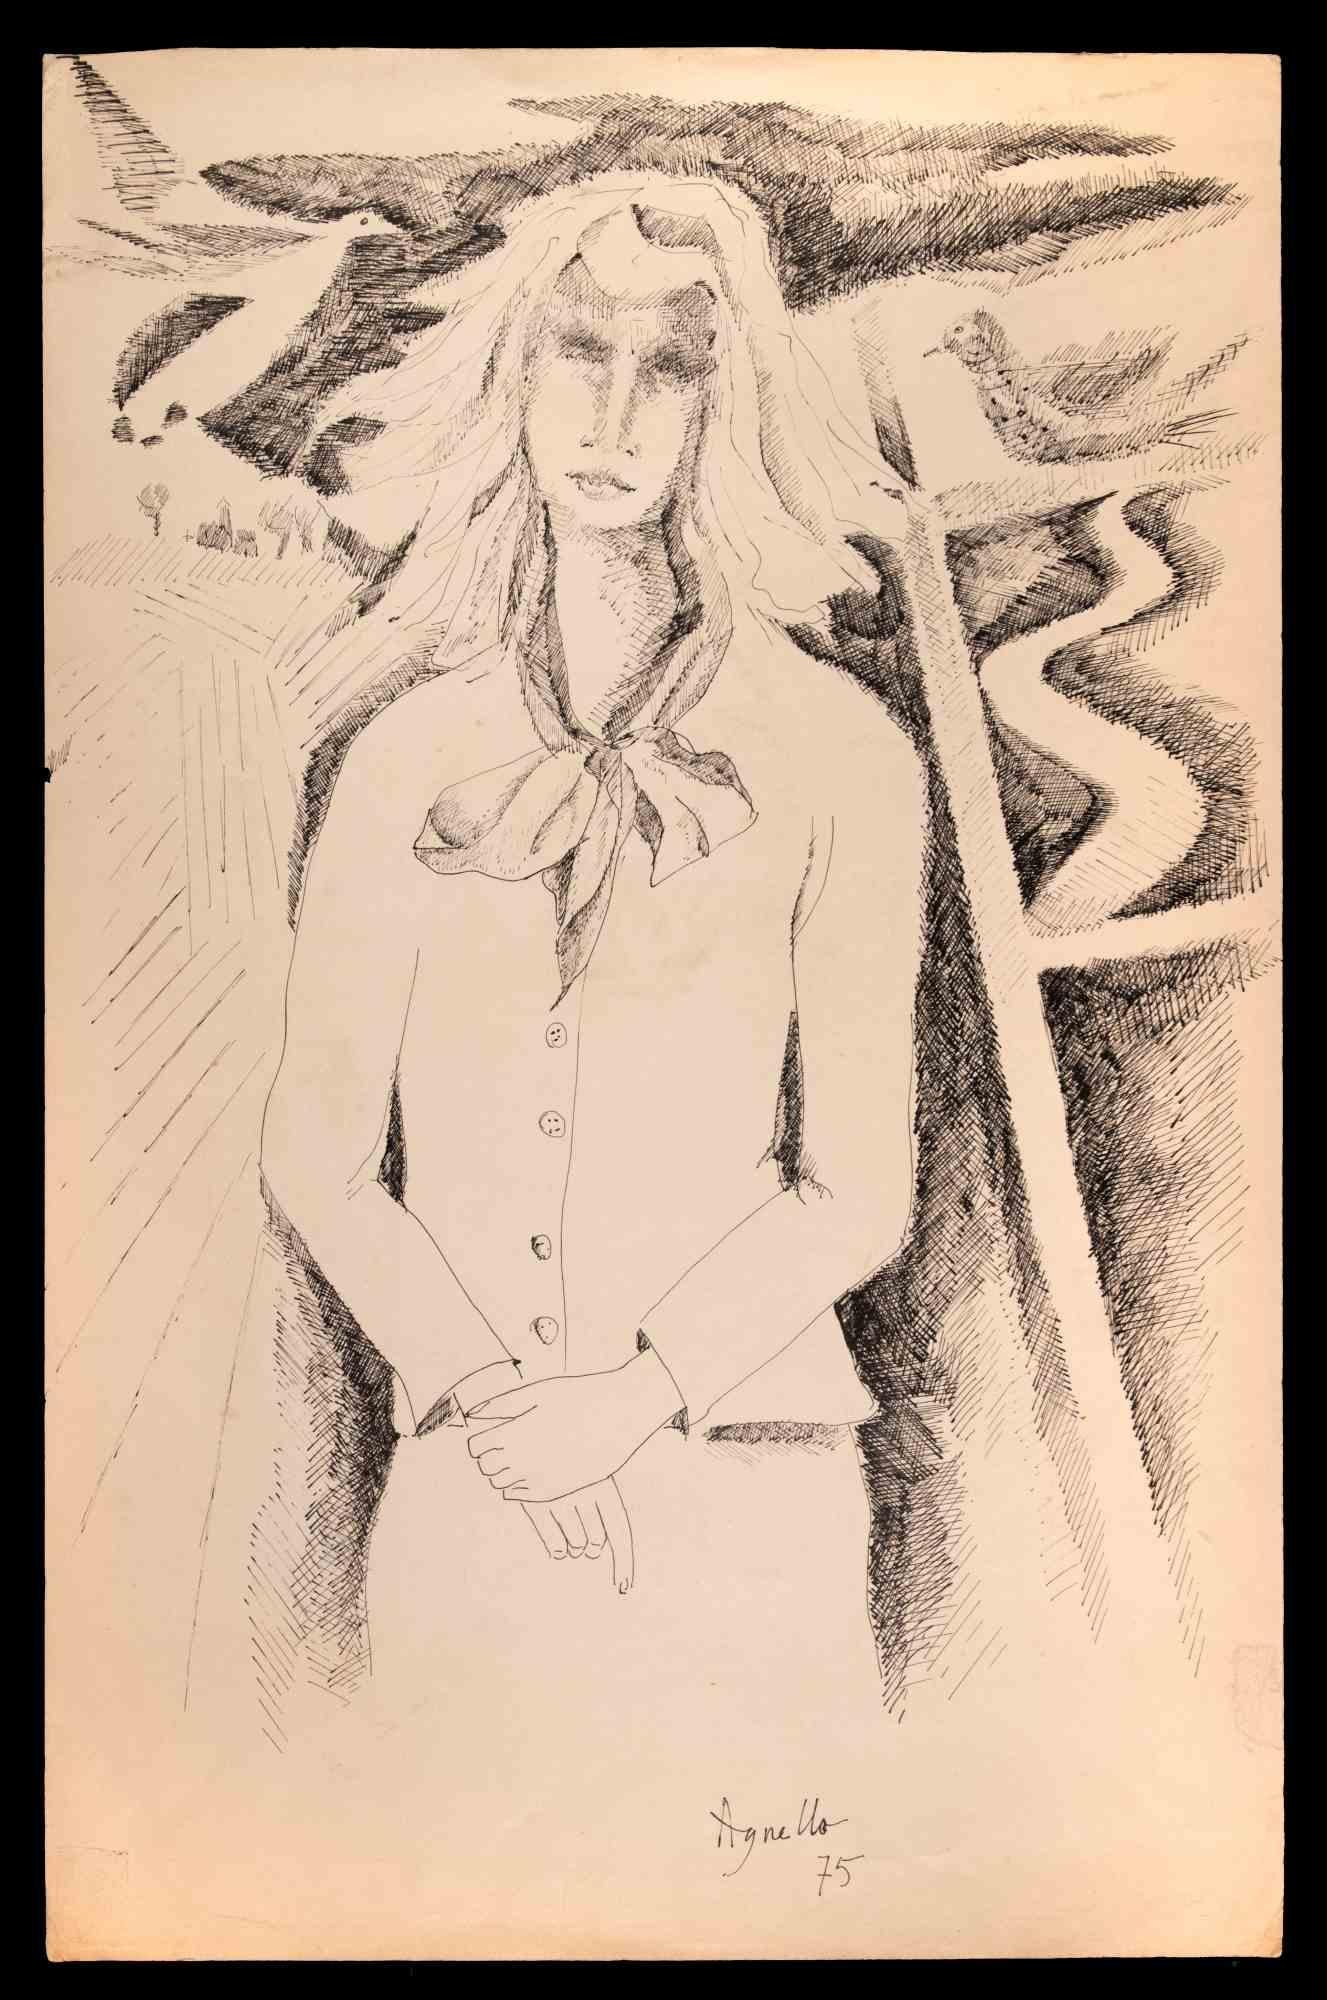 Woman is an Original Pen Drawing realized by Dominique Agnello in 1975.

The artwork is in good condition on a yellowed paper.

Hand-signed and dated by the artist on the lower margin.

Dominique Agnello born in 1921, is a peinter in Tunis, expose